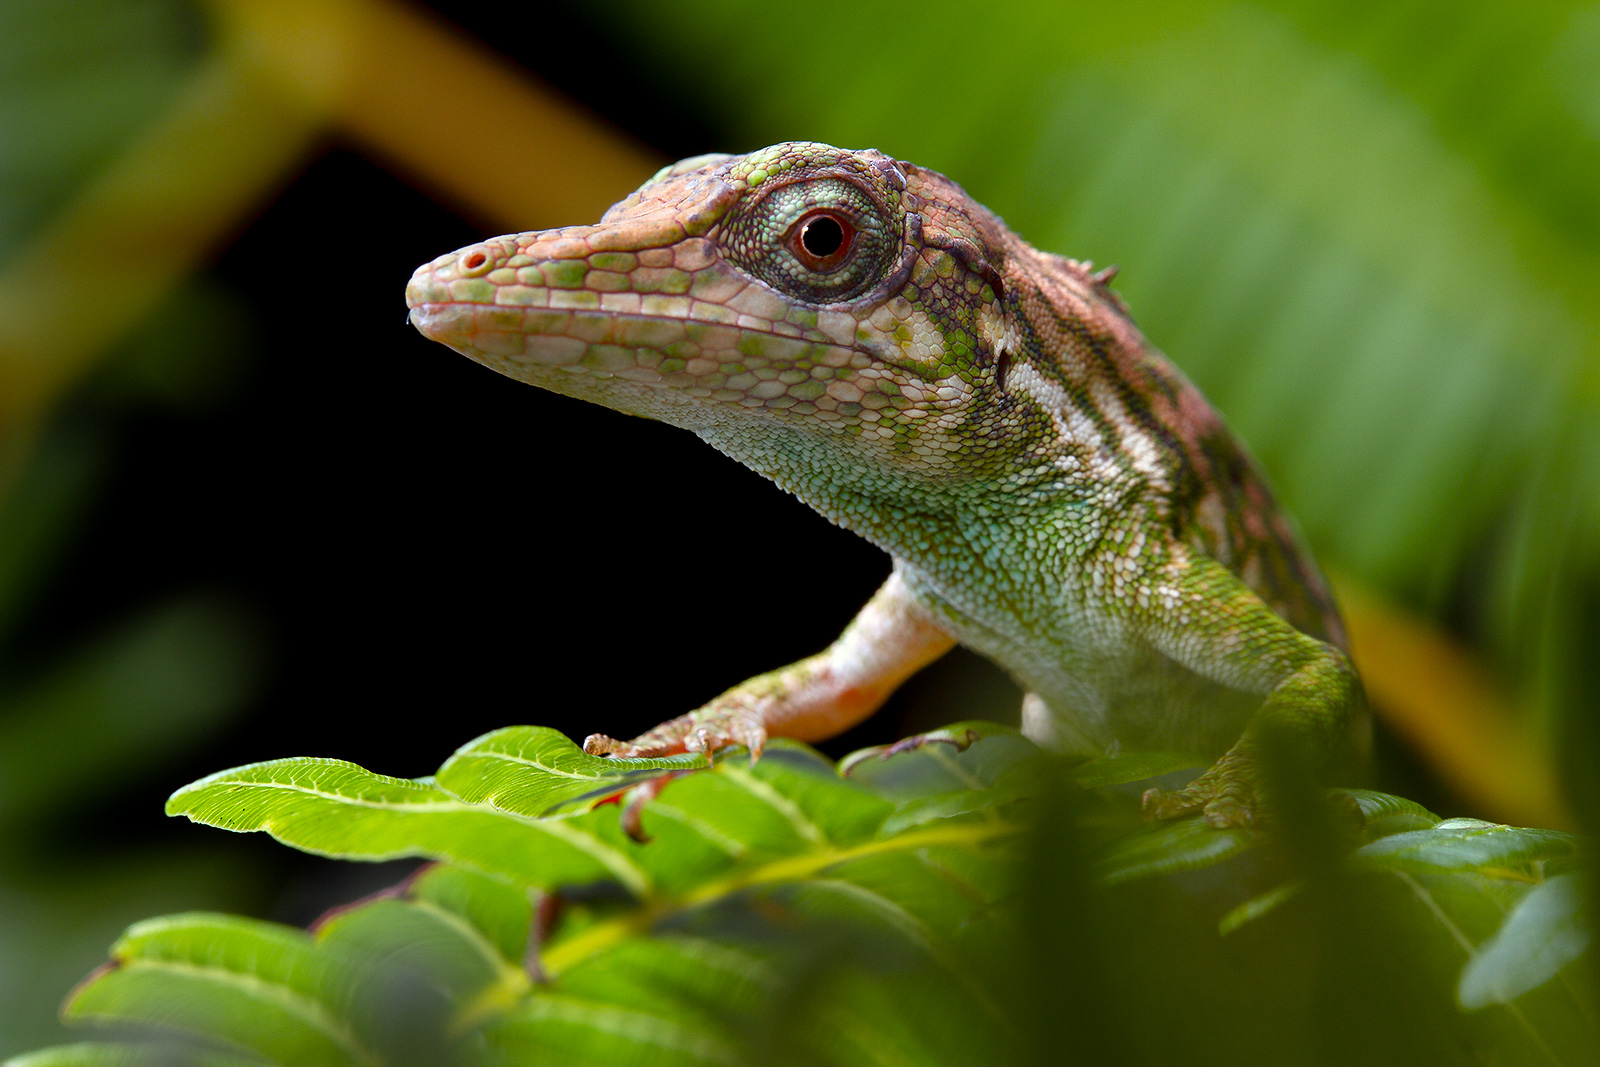 Picture of a Orcés' Anole (Anolis orcesi) created using the image stabilization feature turned off